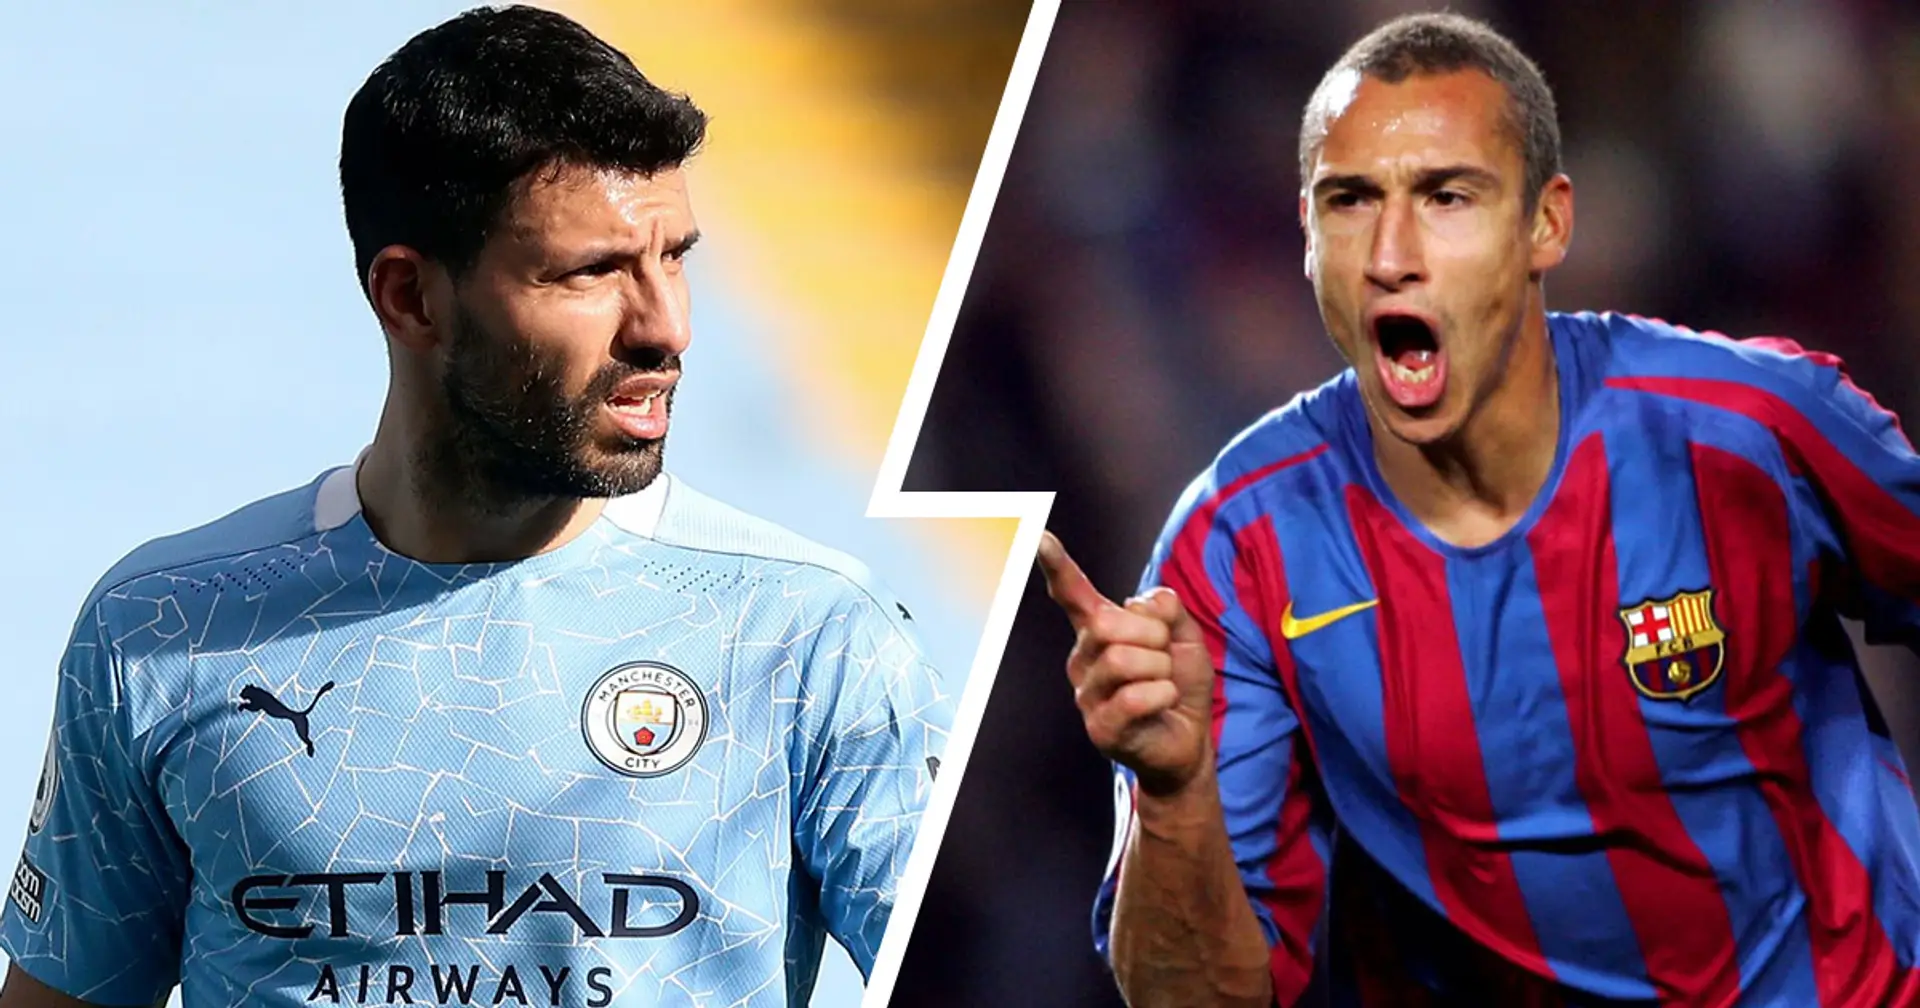 Sergio Aguero could emulate Henrik Larsson's career at Barca: explained in 5 key points